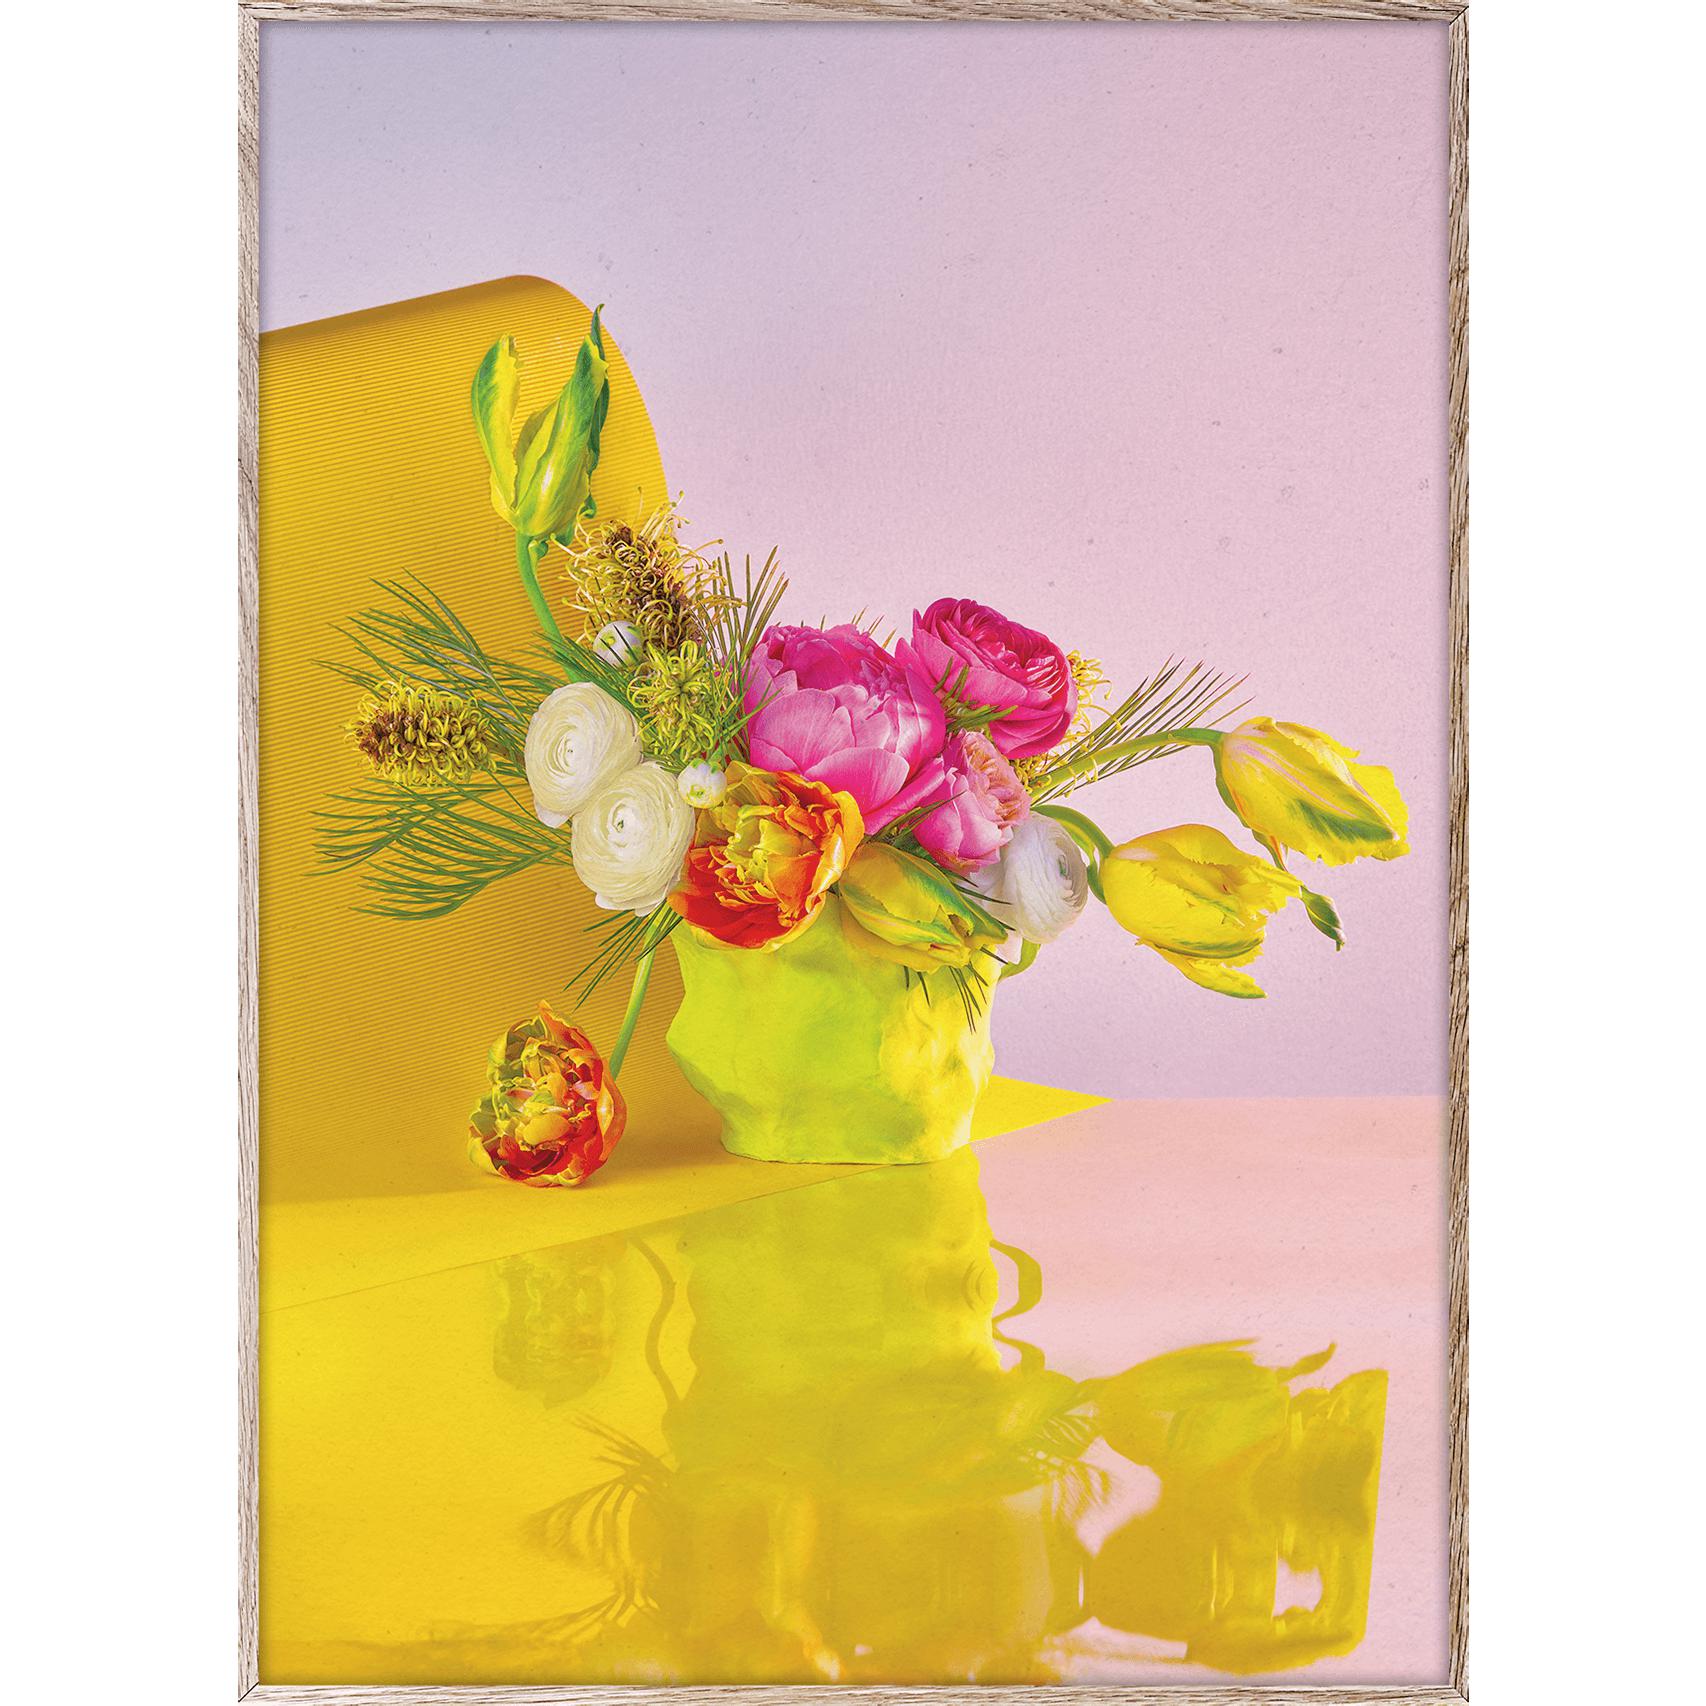 Paper Collective Bloom 03 Poster 50x70 Cm, Yellow